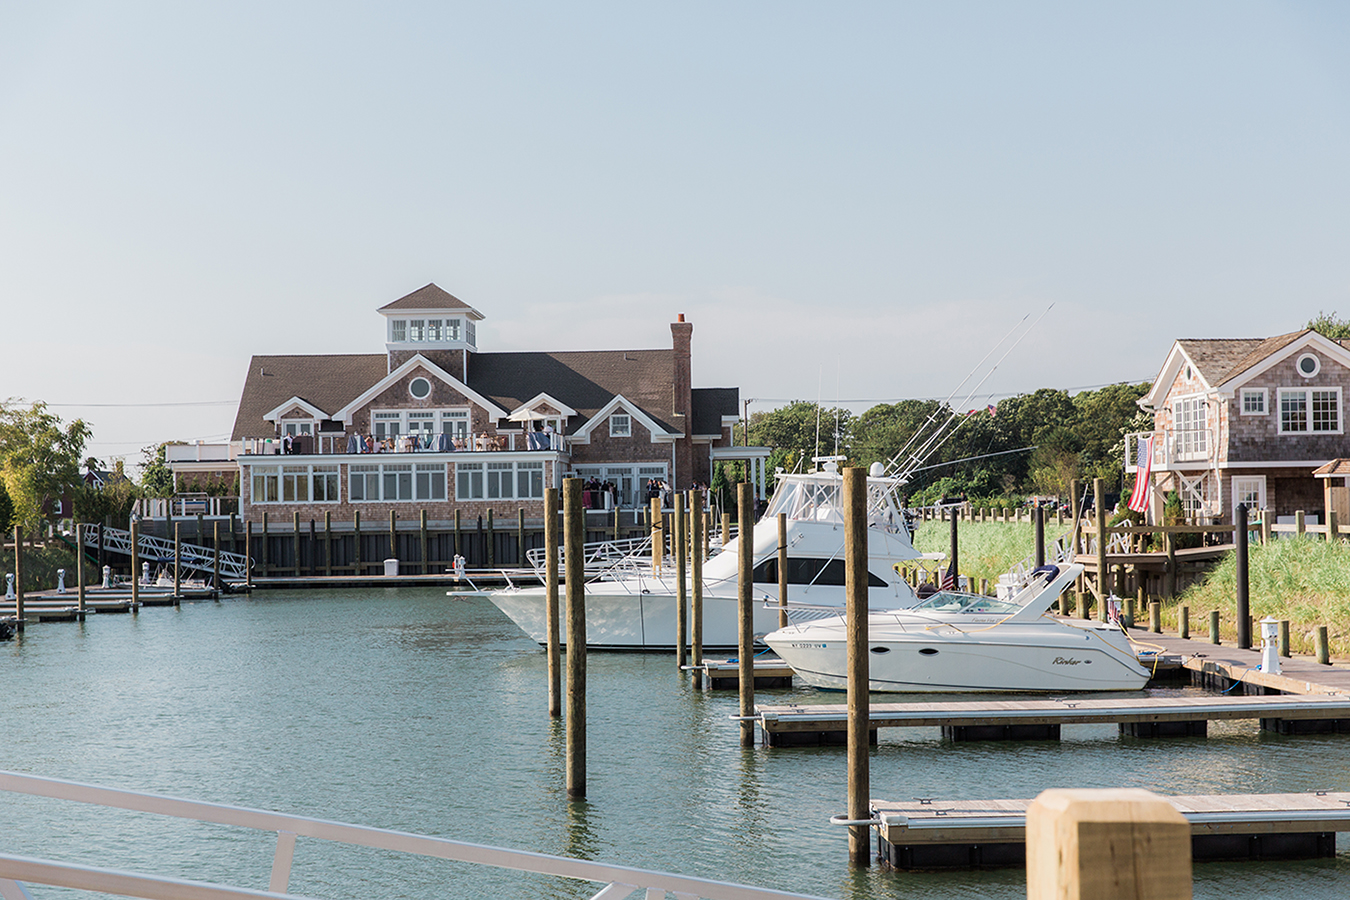 peconic bay yacht club about